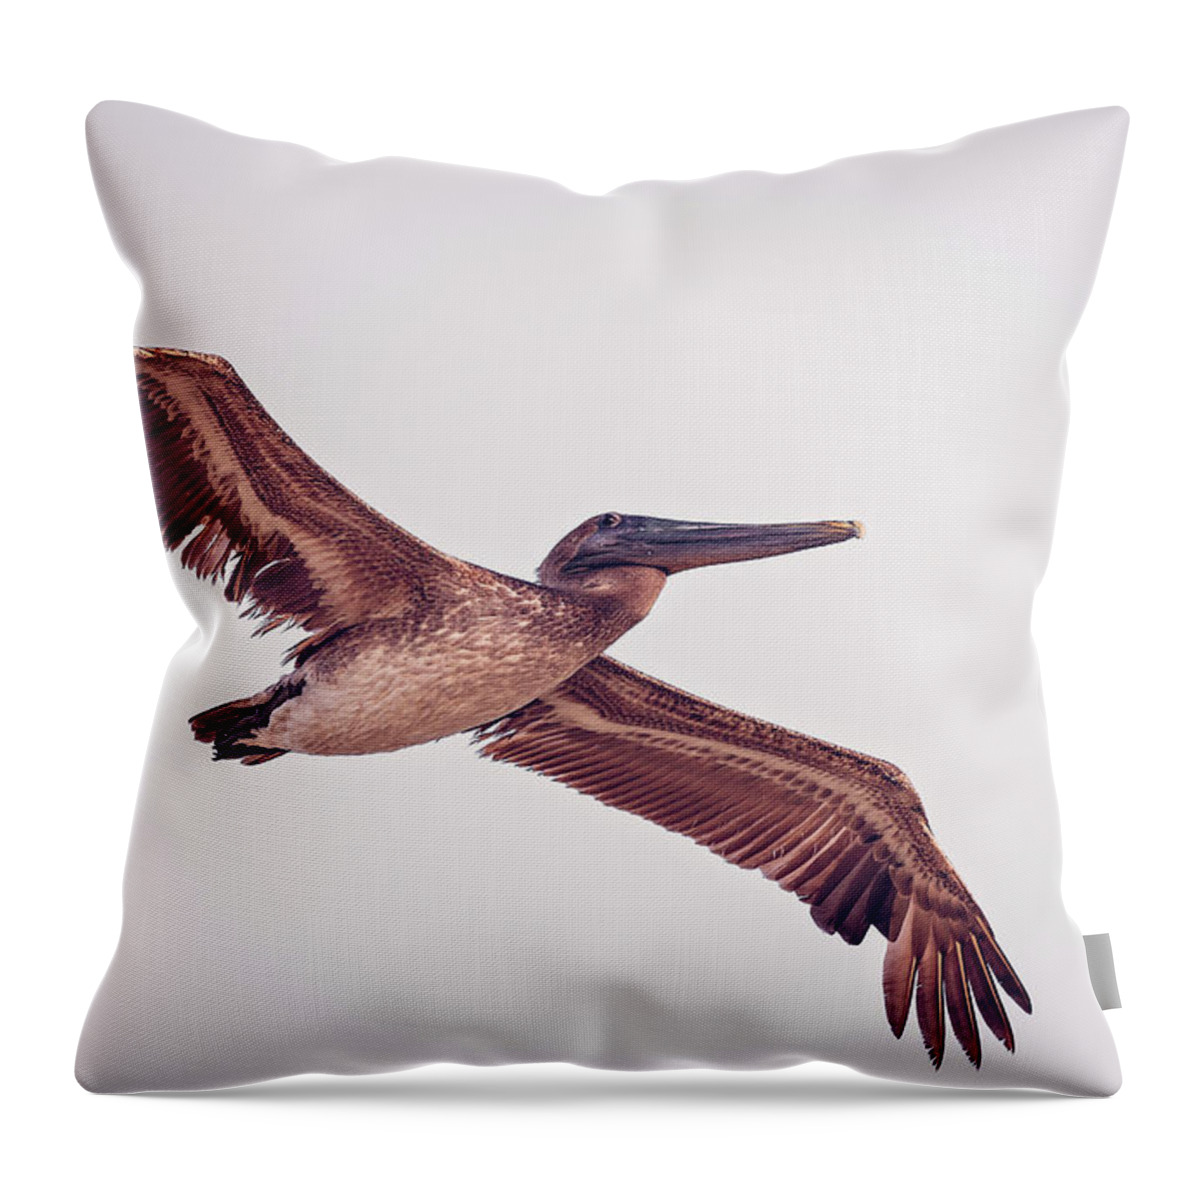 Aqua Throw Pillow featuring the photograph Pelican by Peter Lakomy